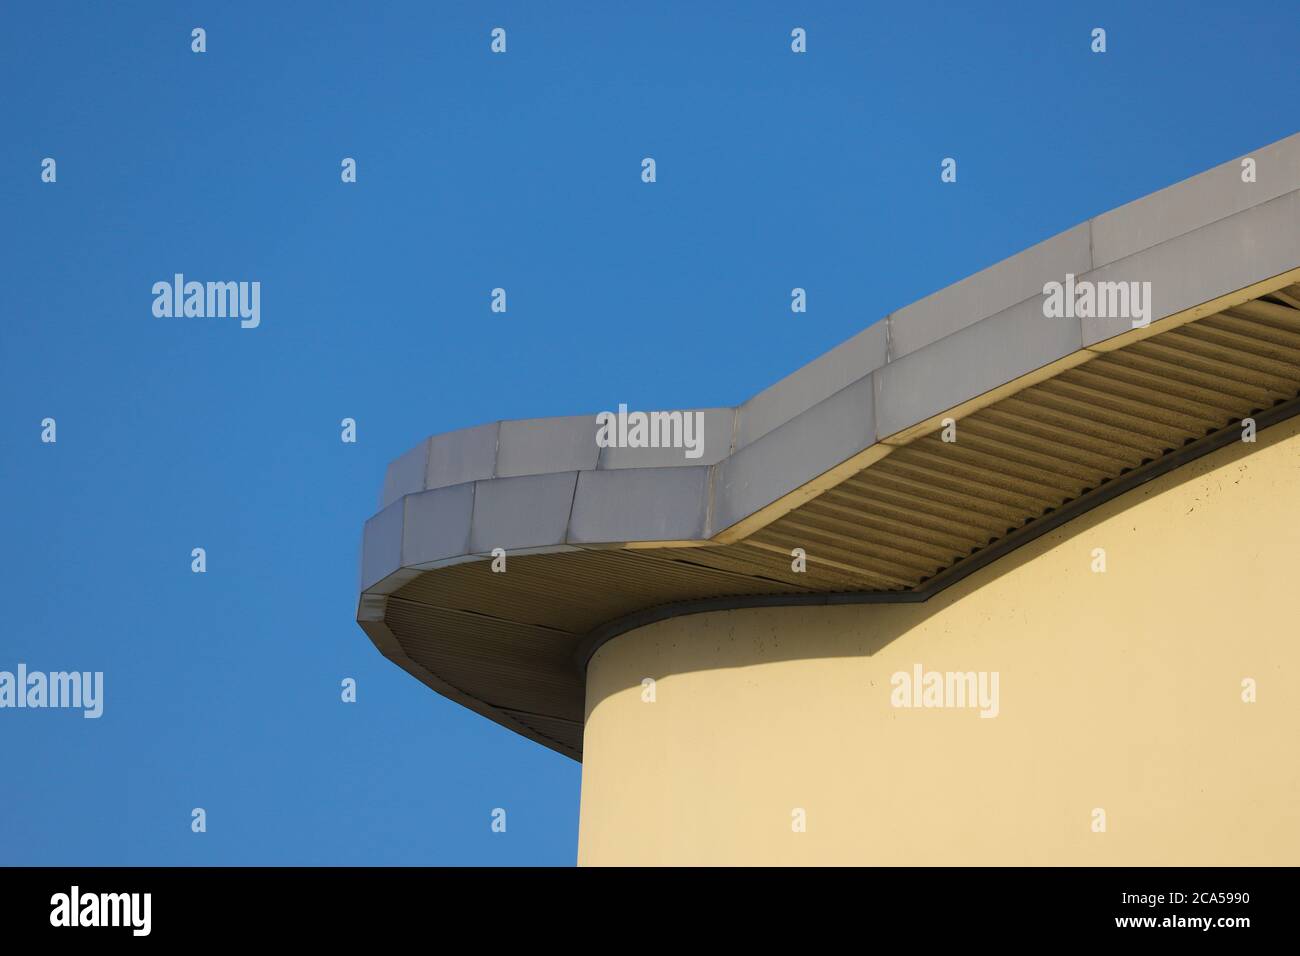 Lead roof of a curved apartment block against a clear blue sky Stock Photo